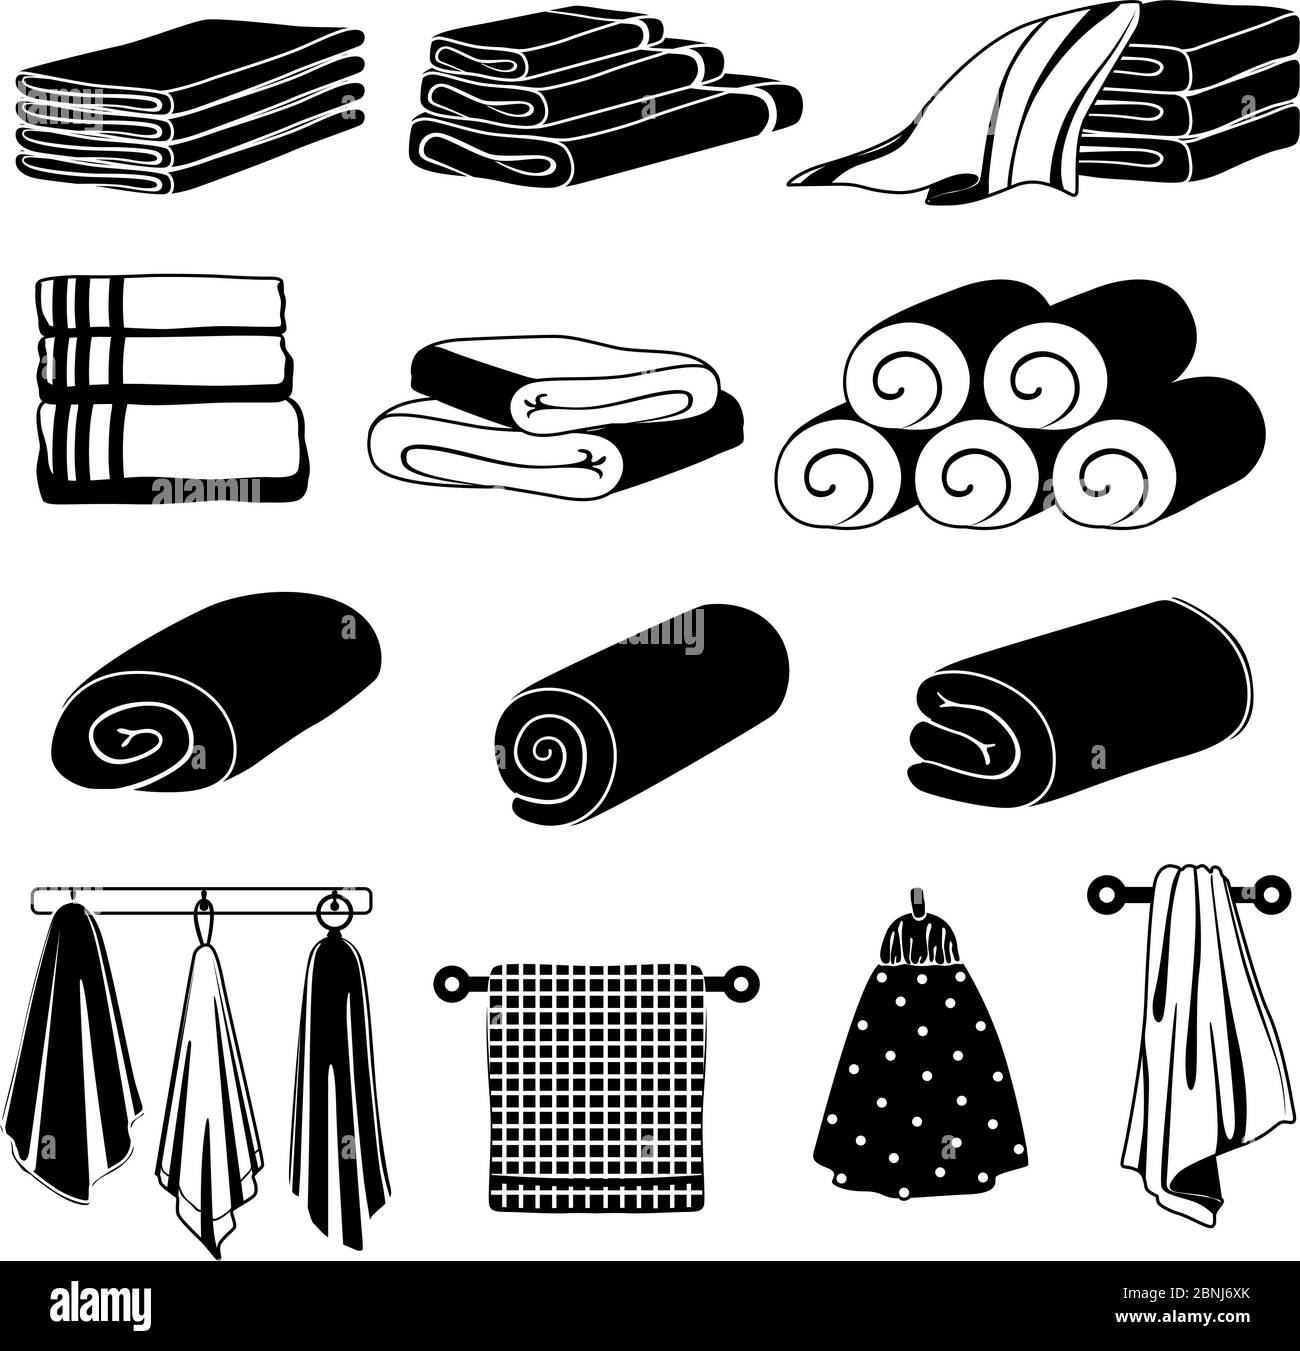 Monochrome illustrations of different towels. Vector set isolate on white Stock Vector